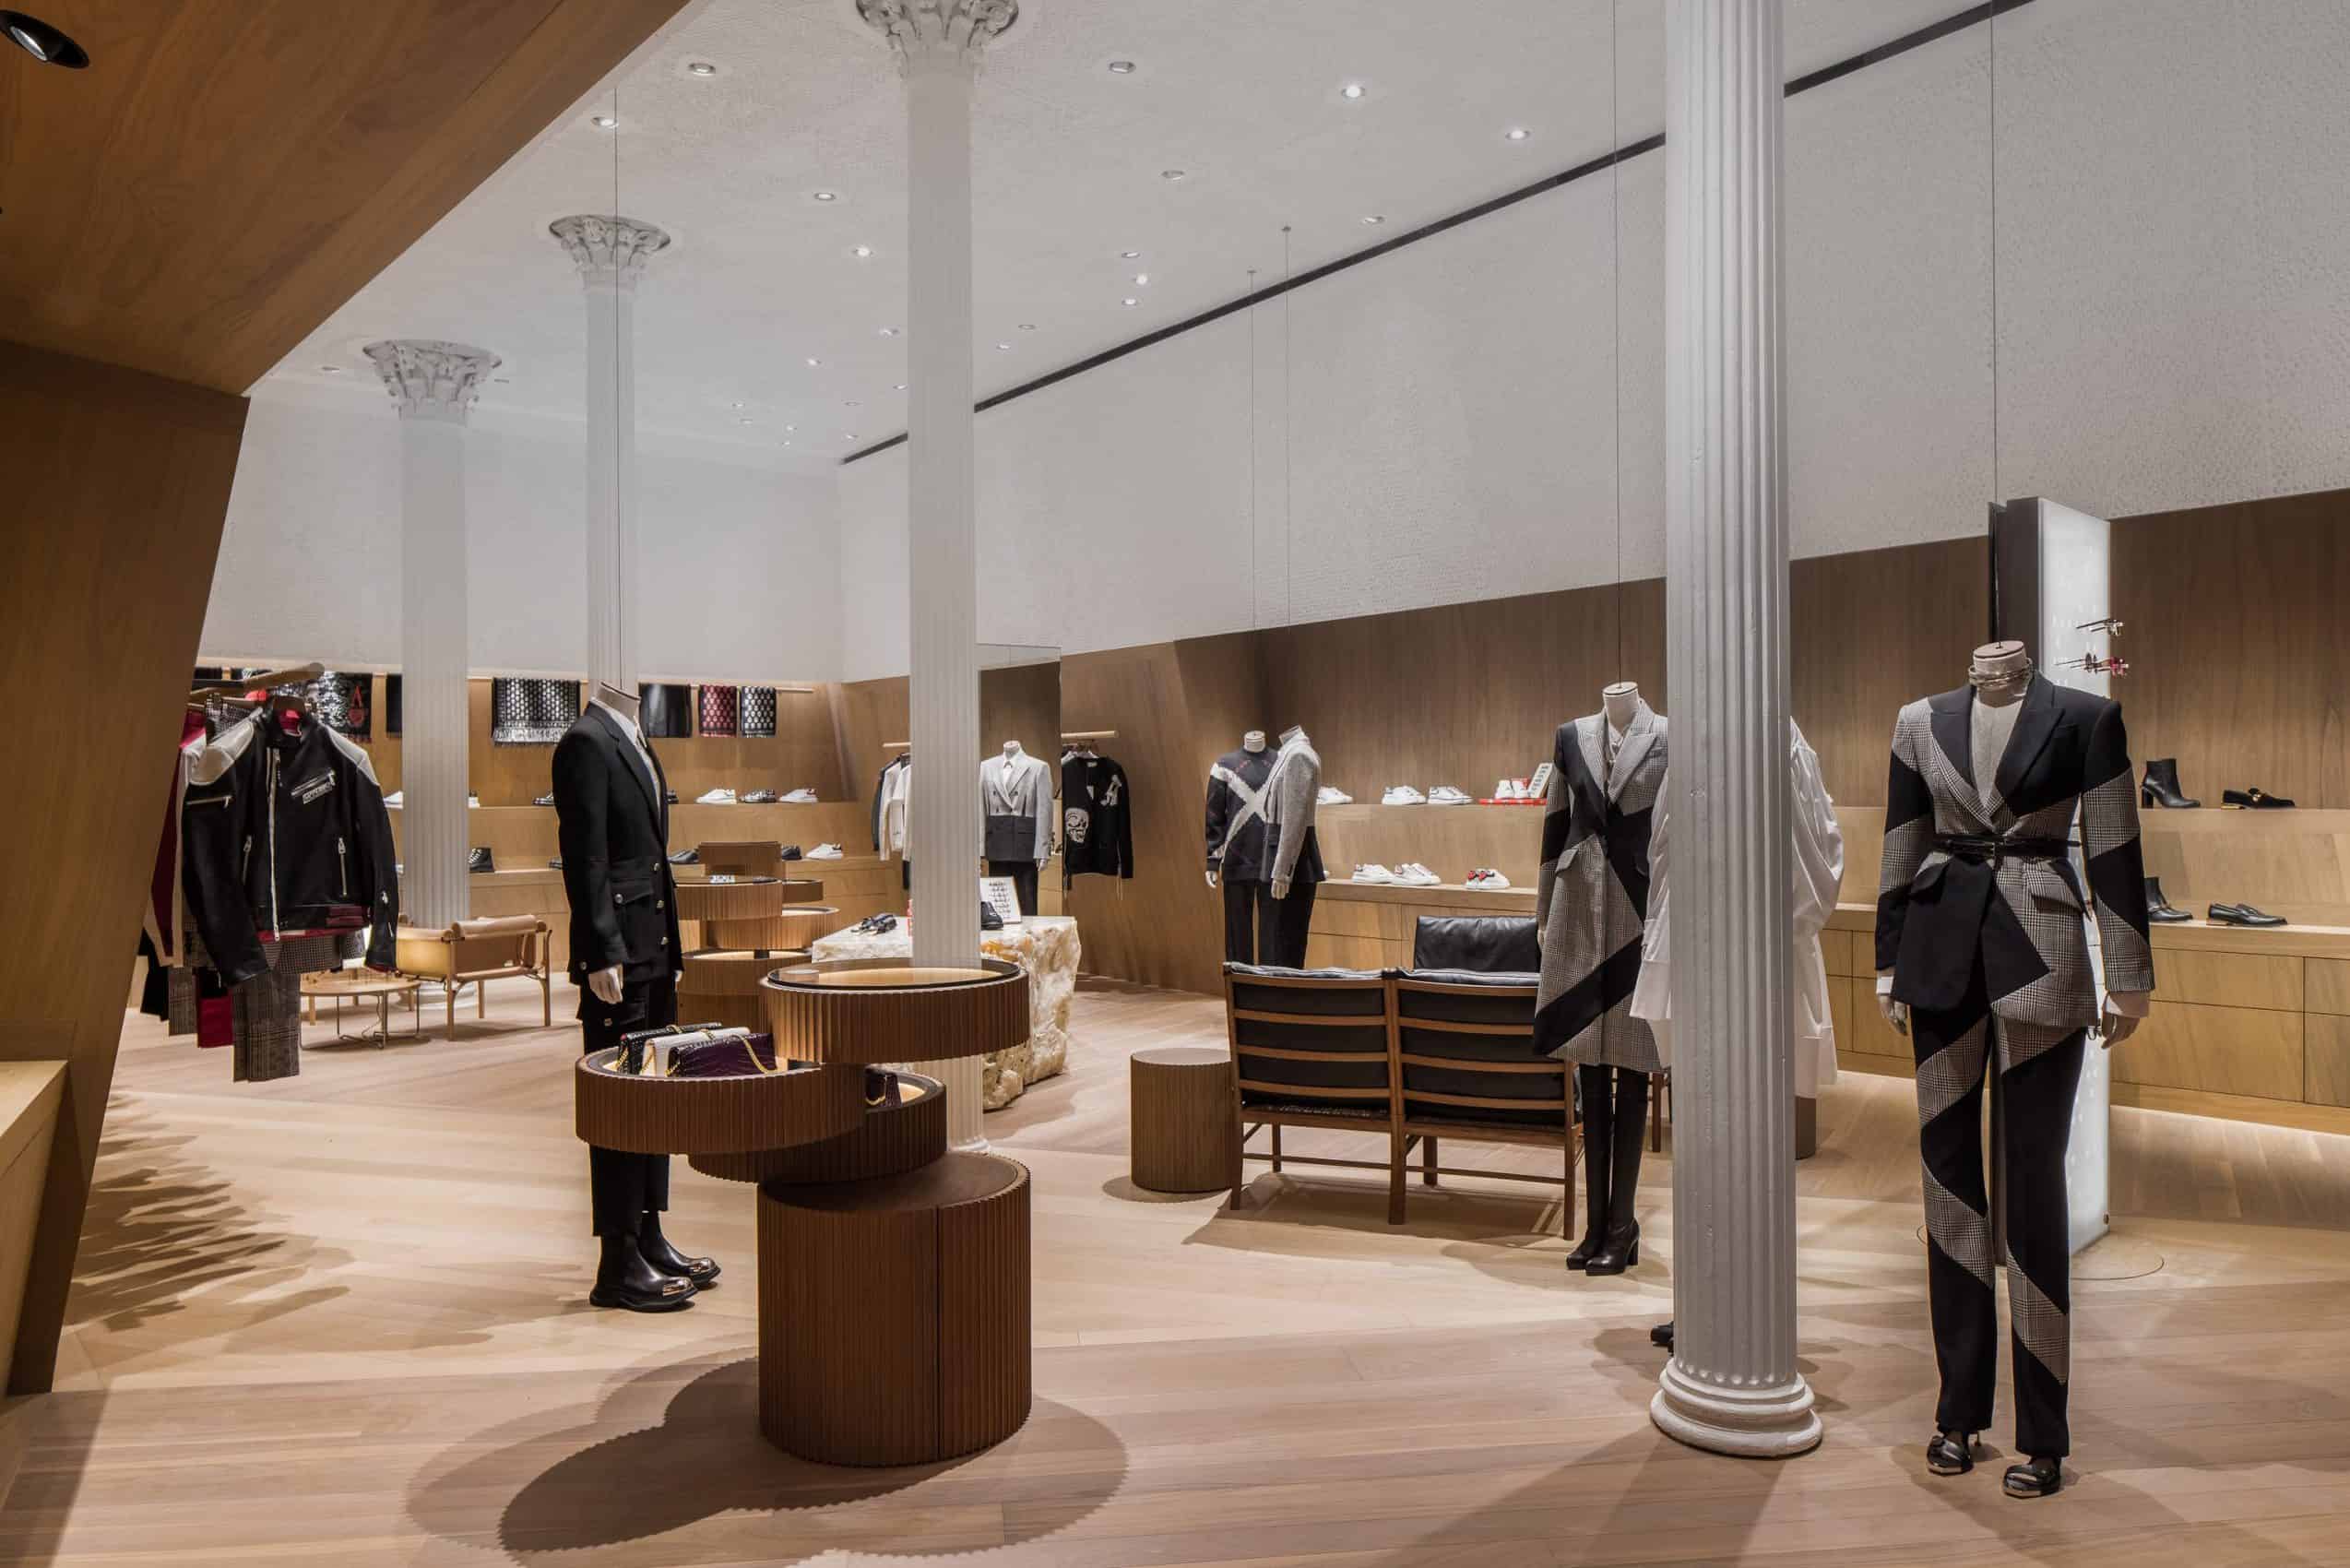 Take a Peek at Louis Vuitton's Redesigned Chicago Flagship Store